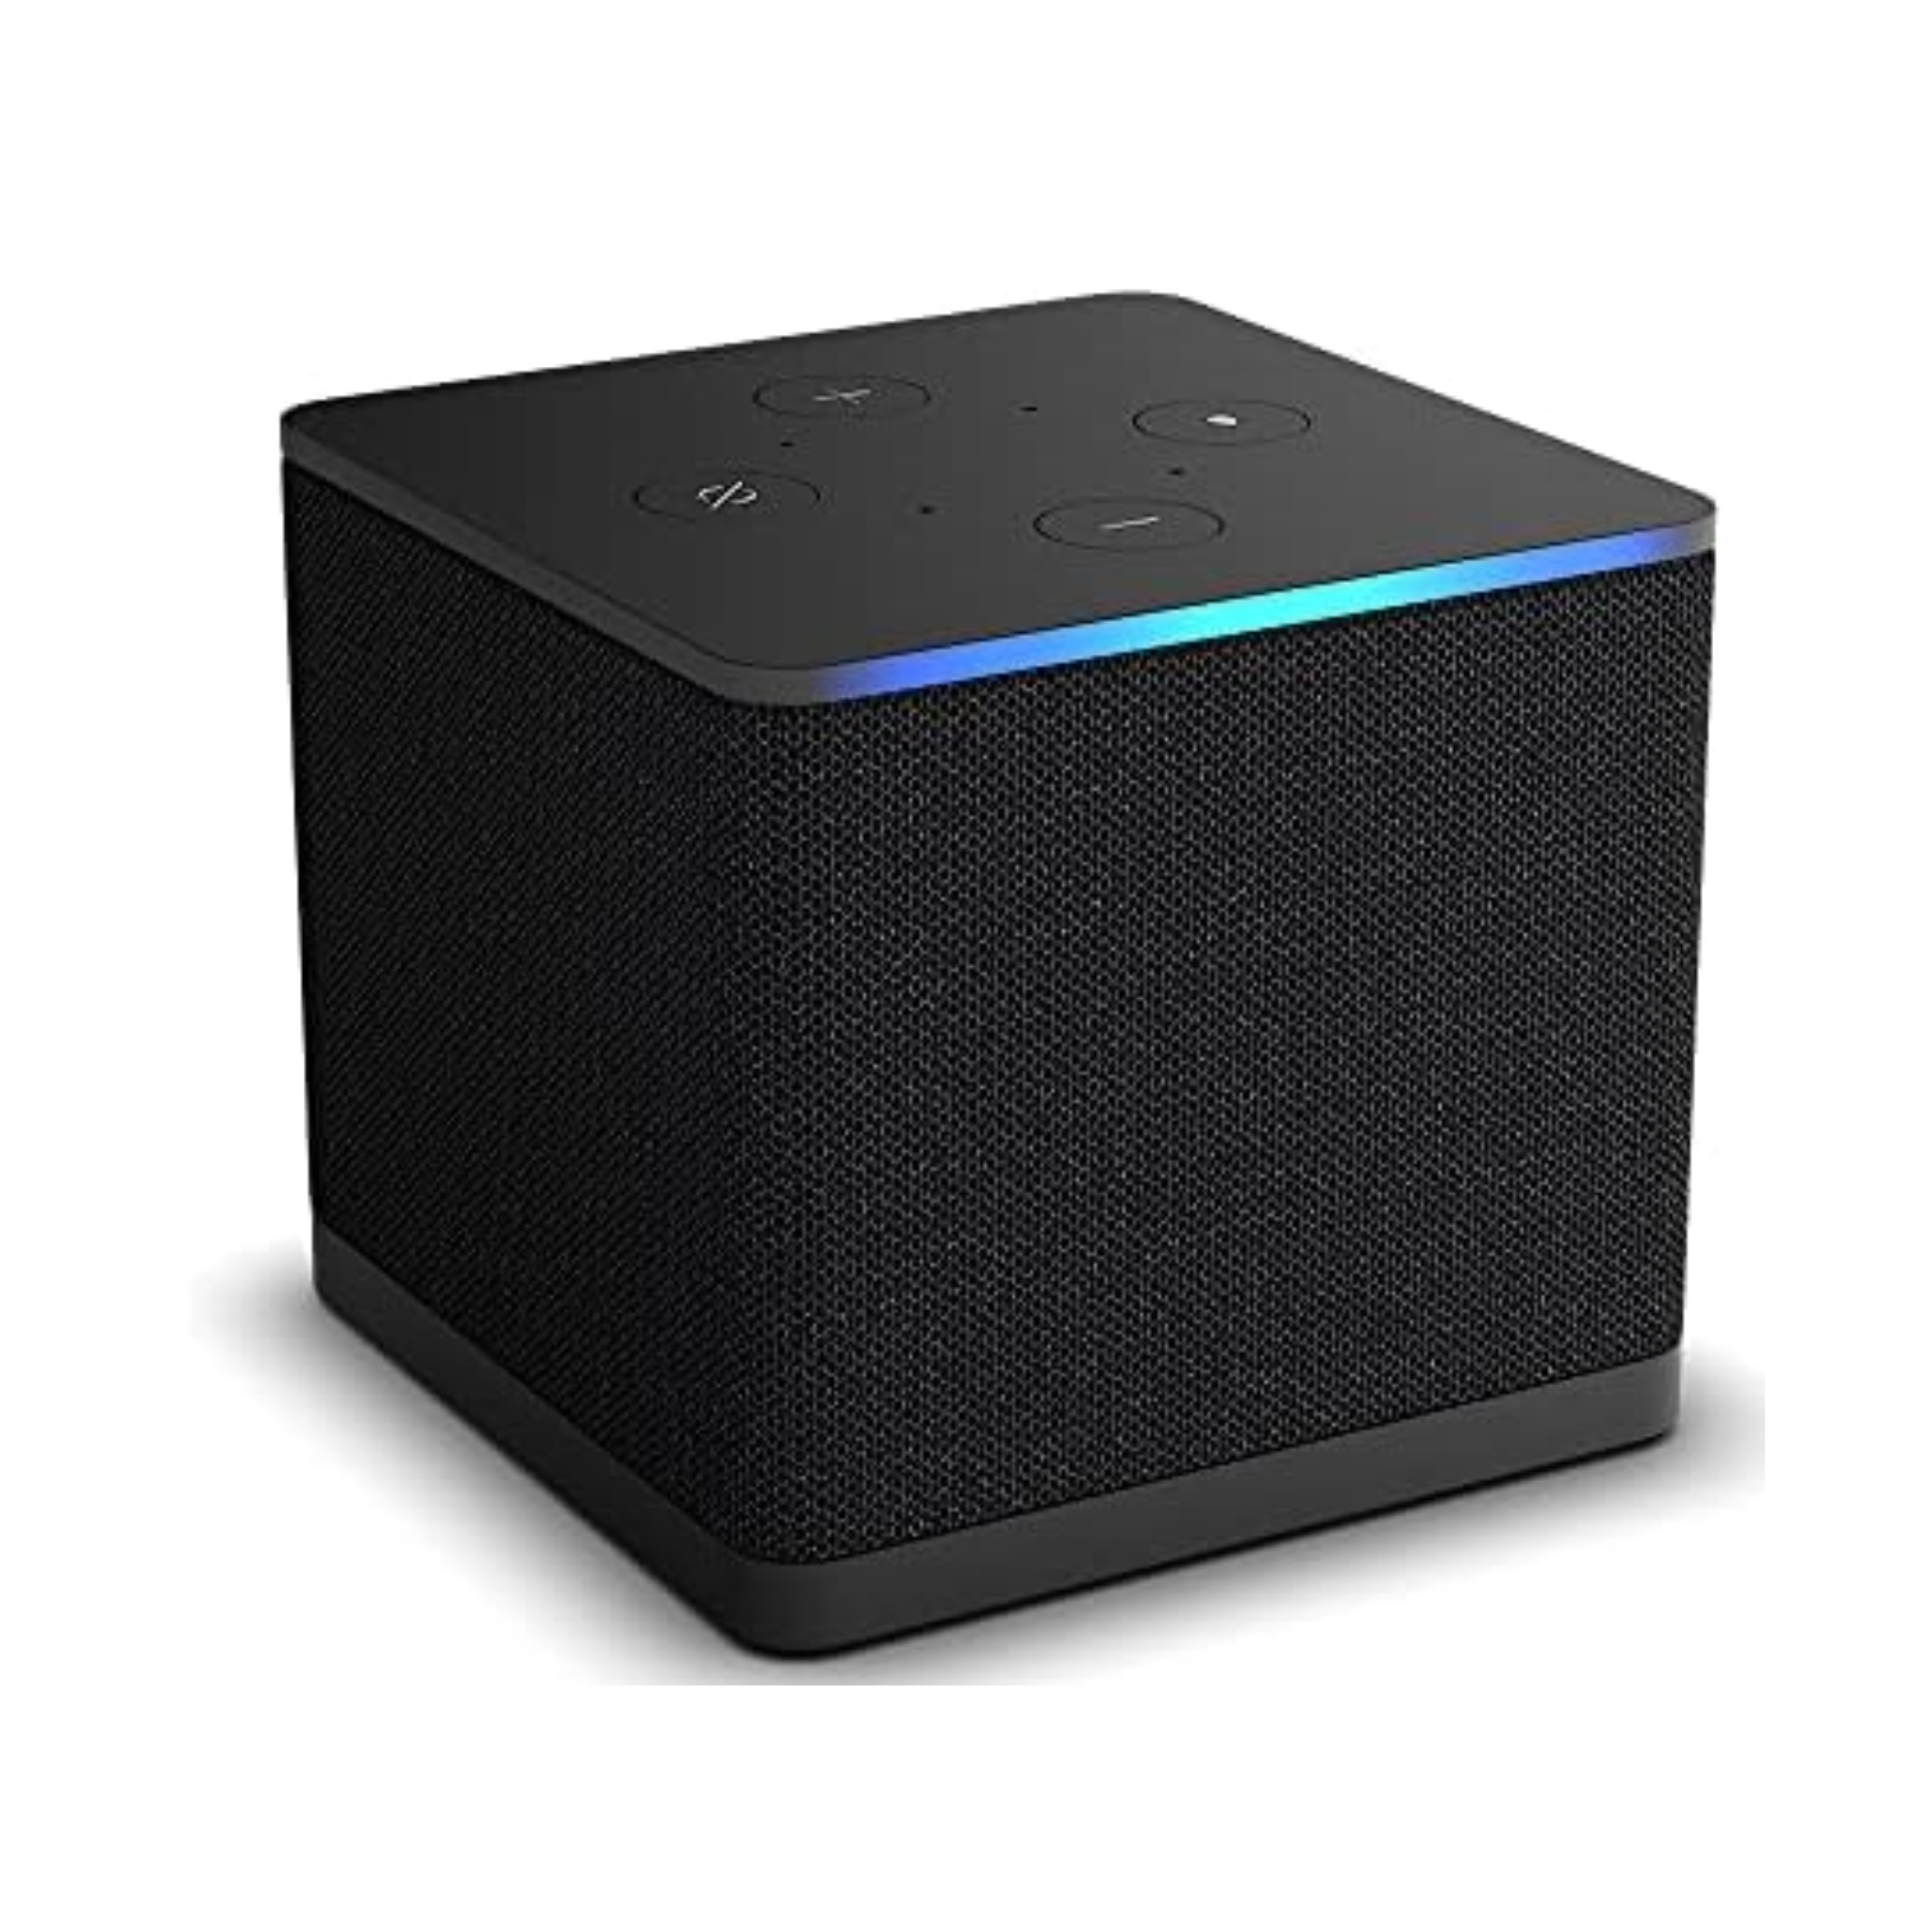 Amazon All-New Fire TV Cube Hands-free Streaming Device